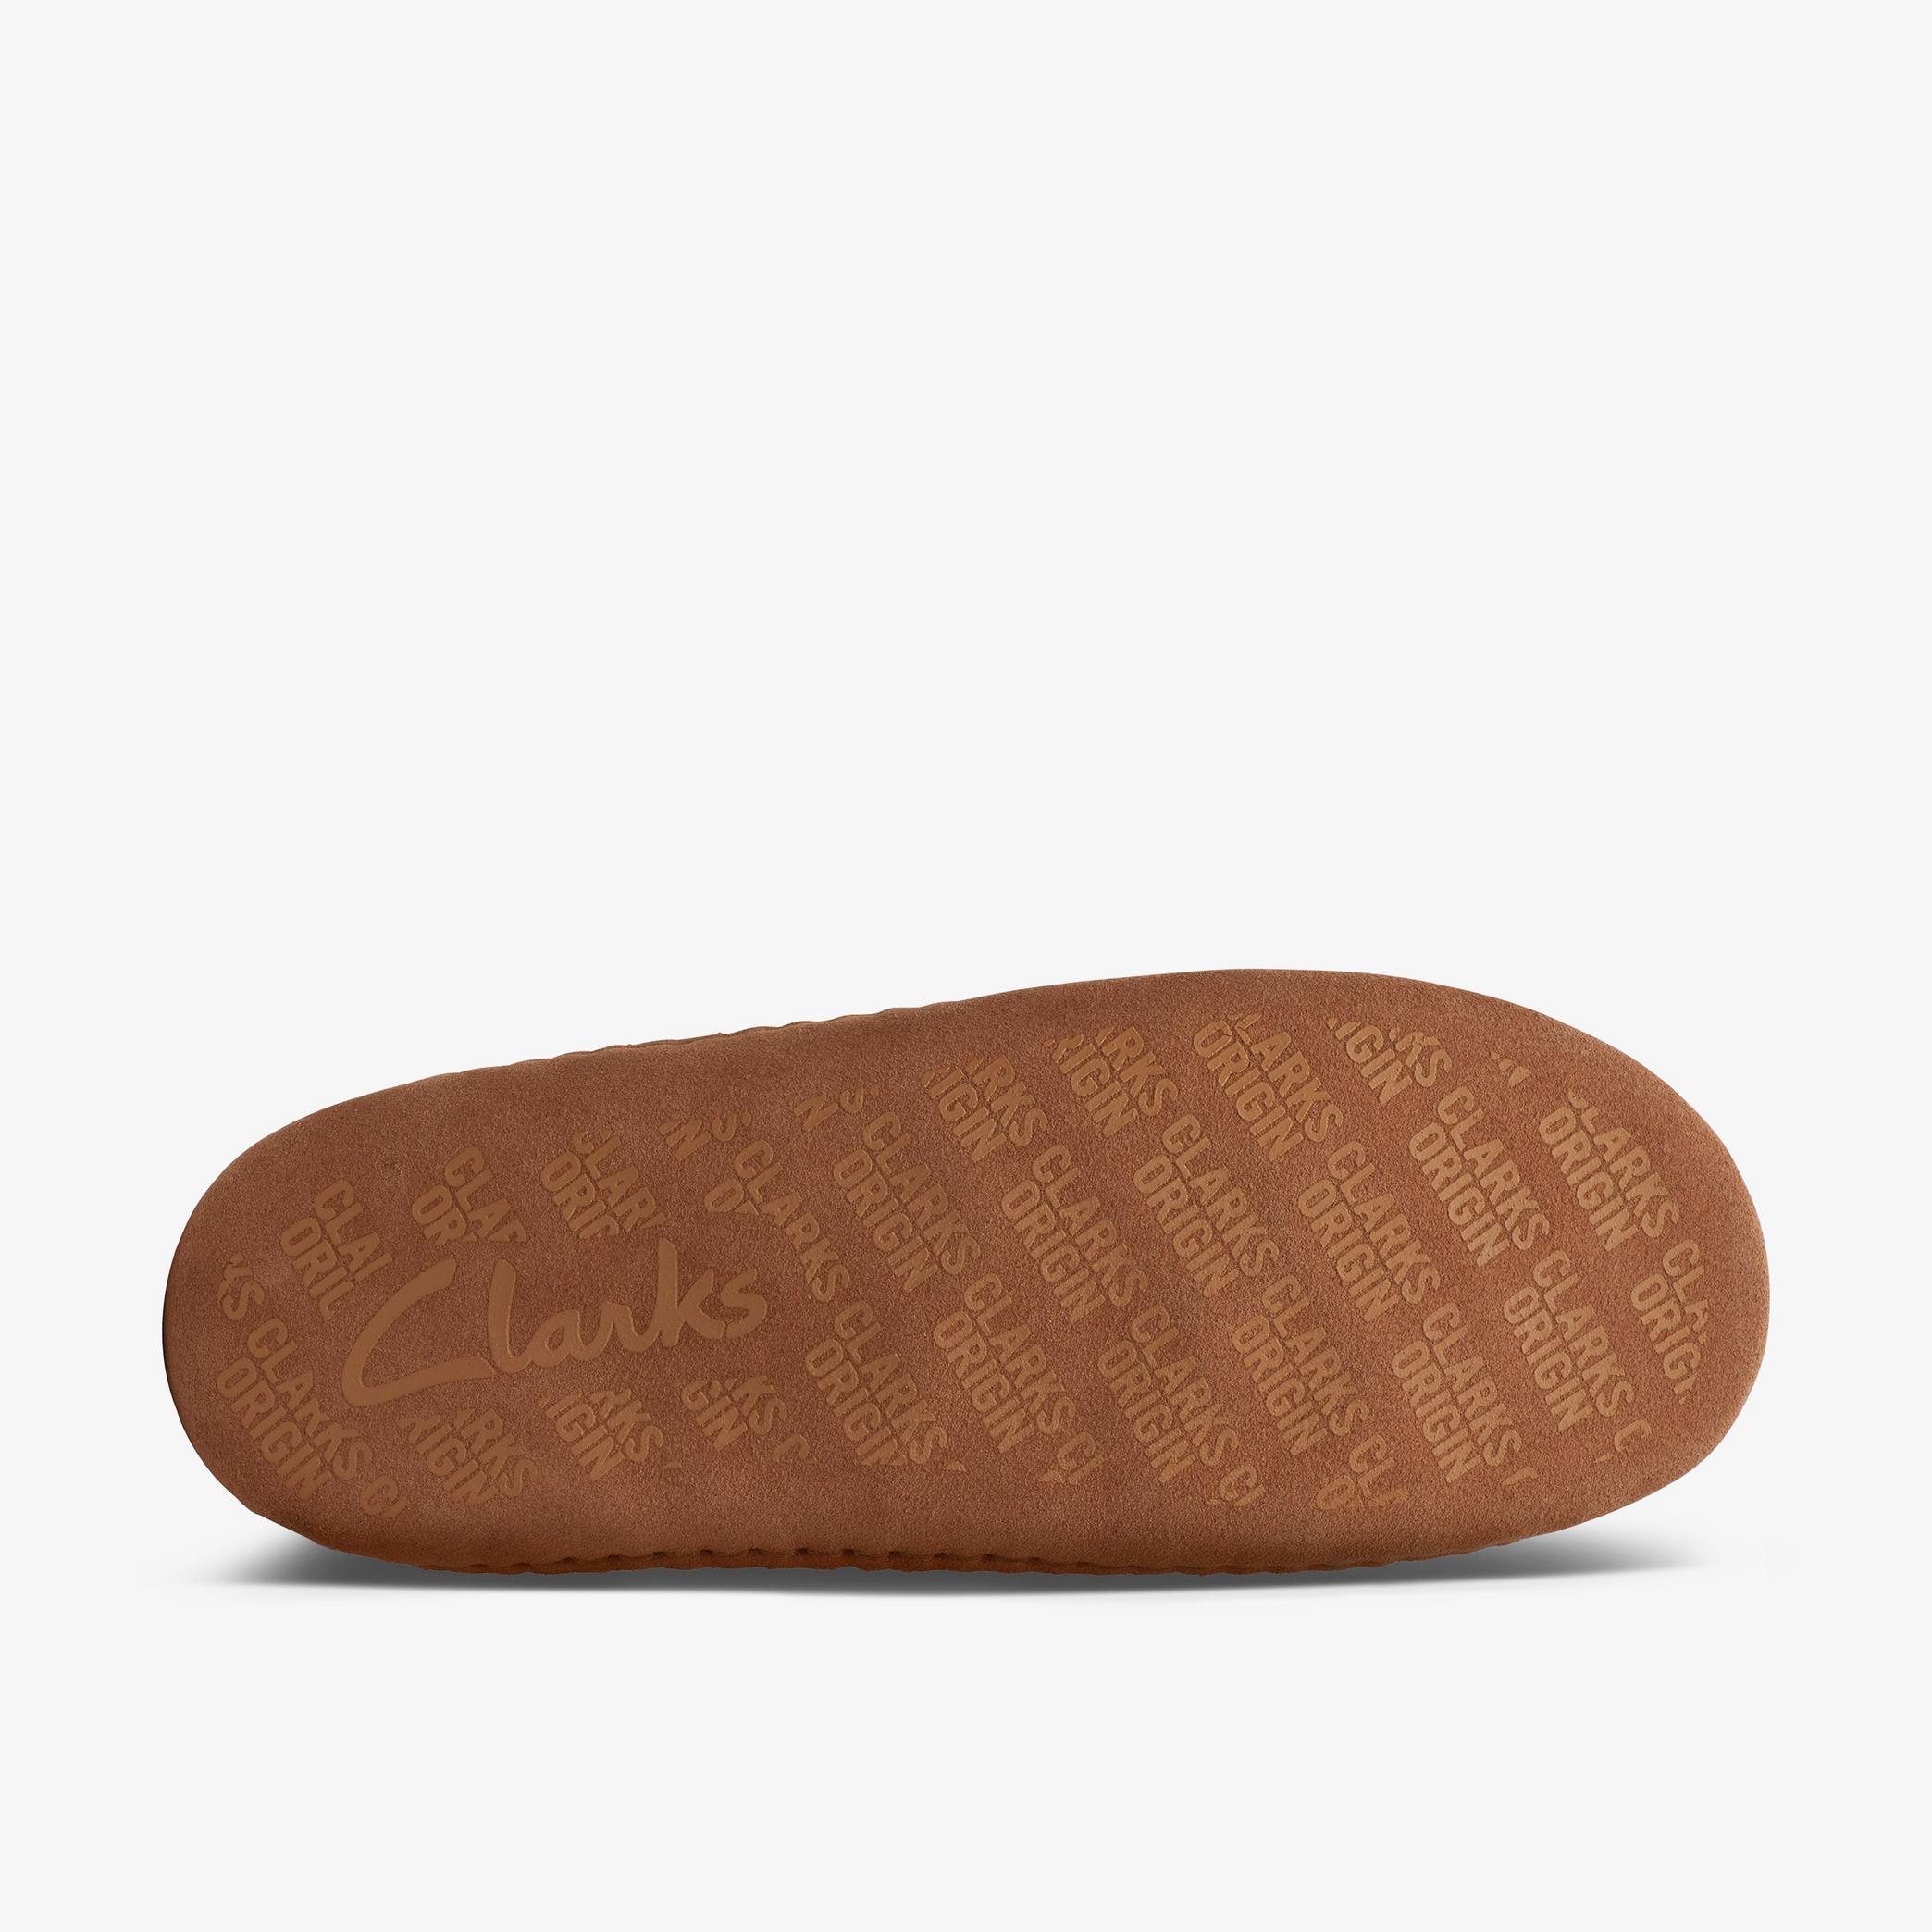 Clarks Origin H Oatmeal Slippers, view 3 of 5